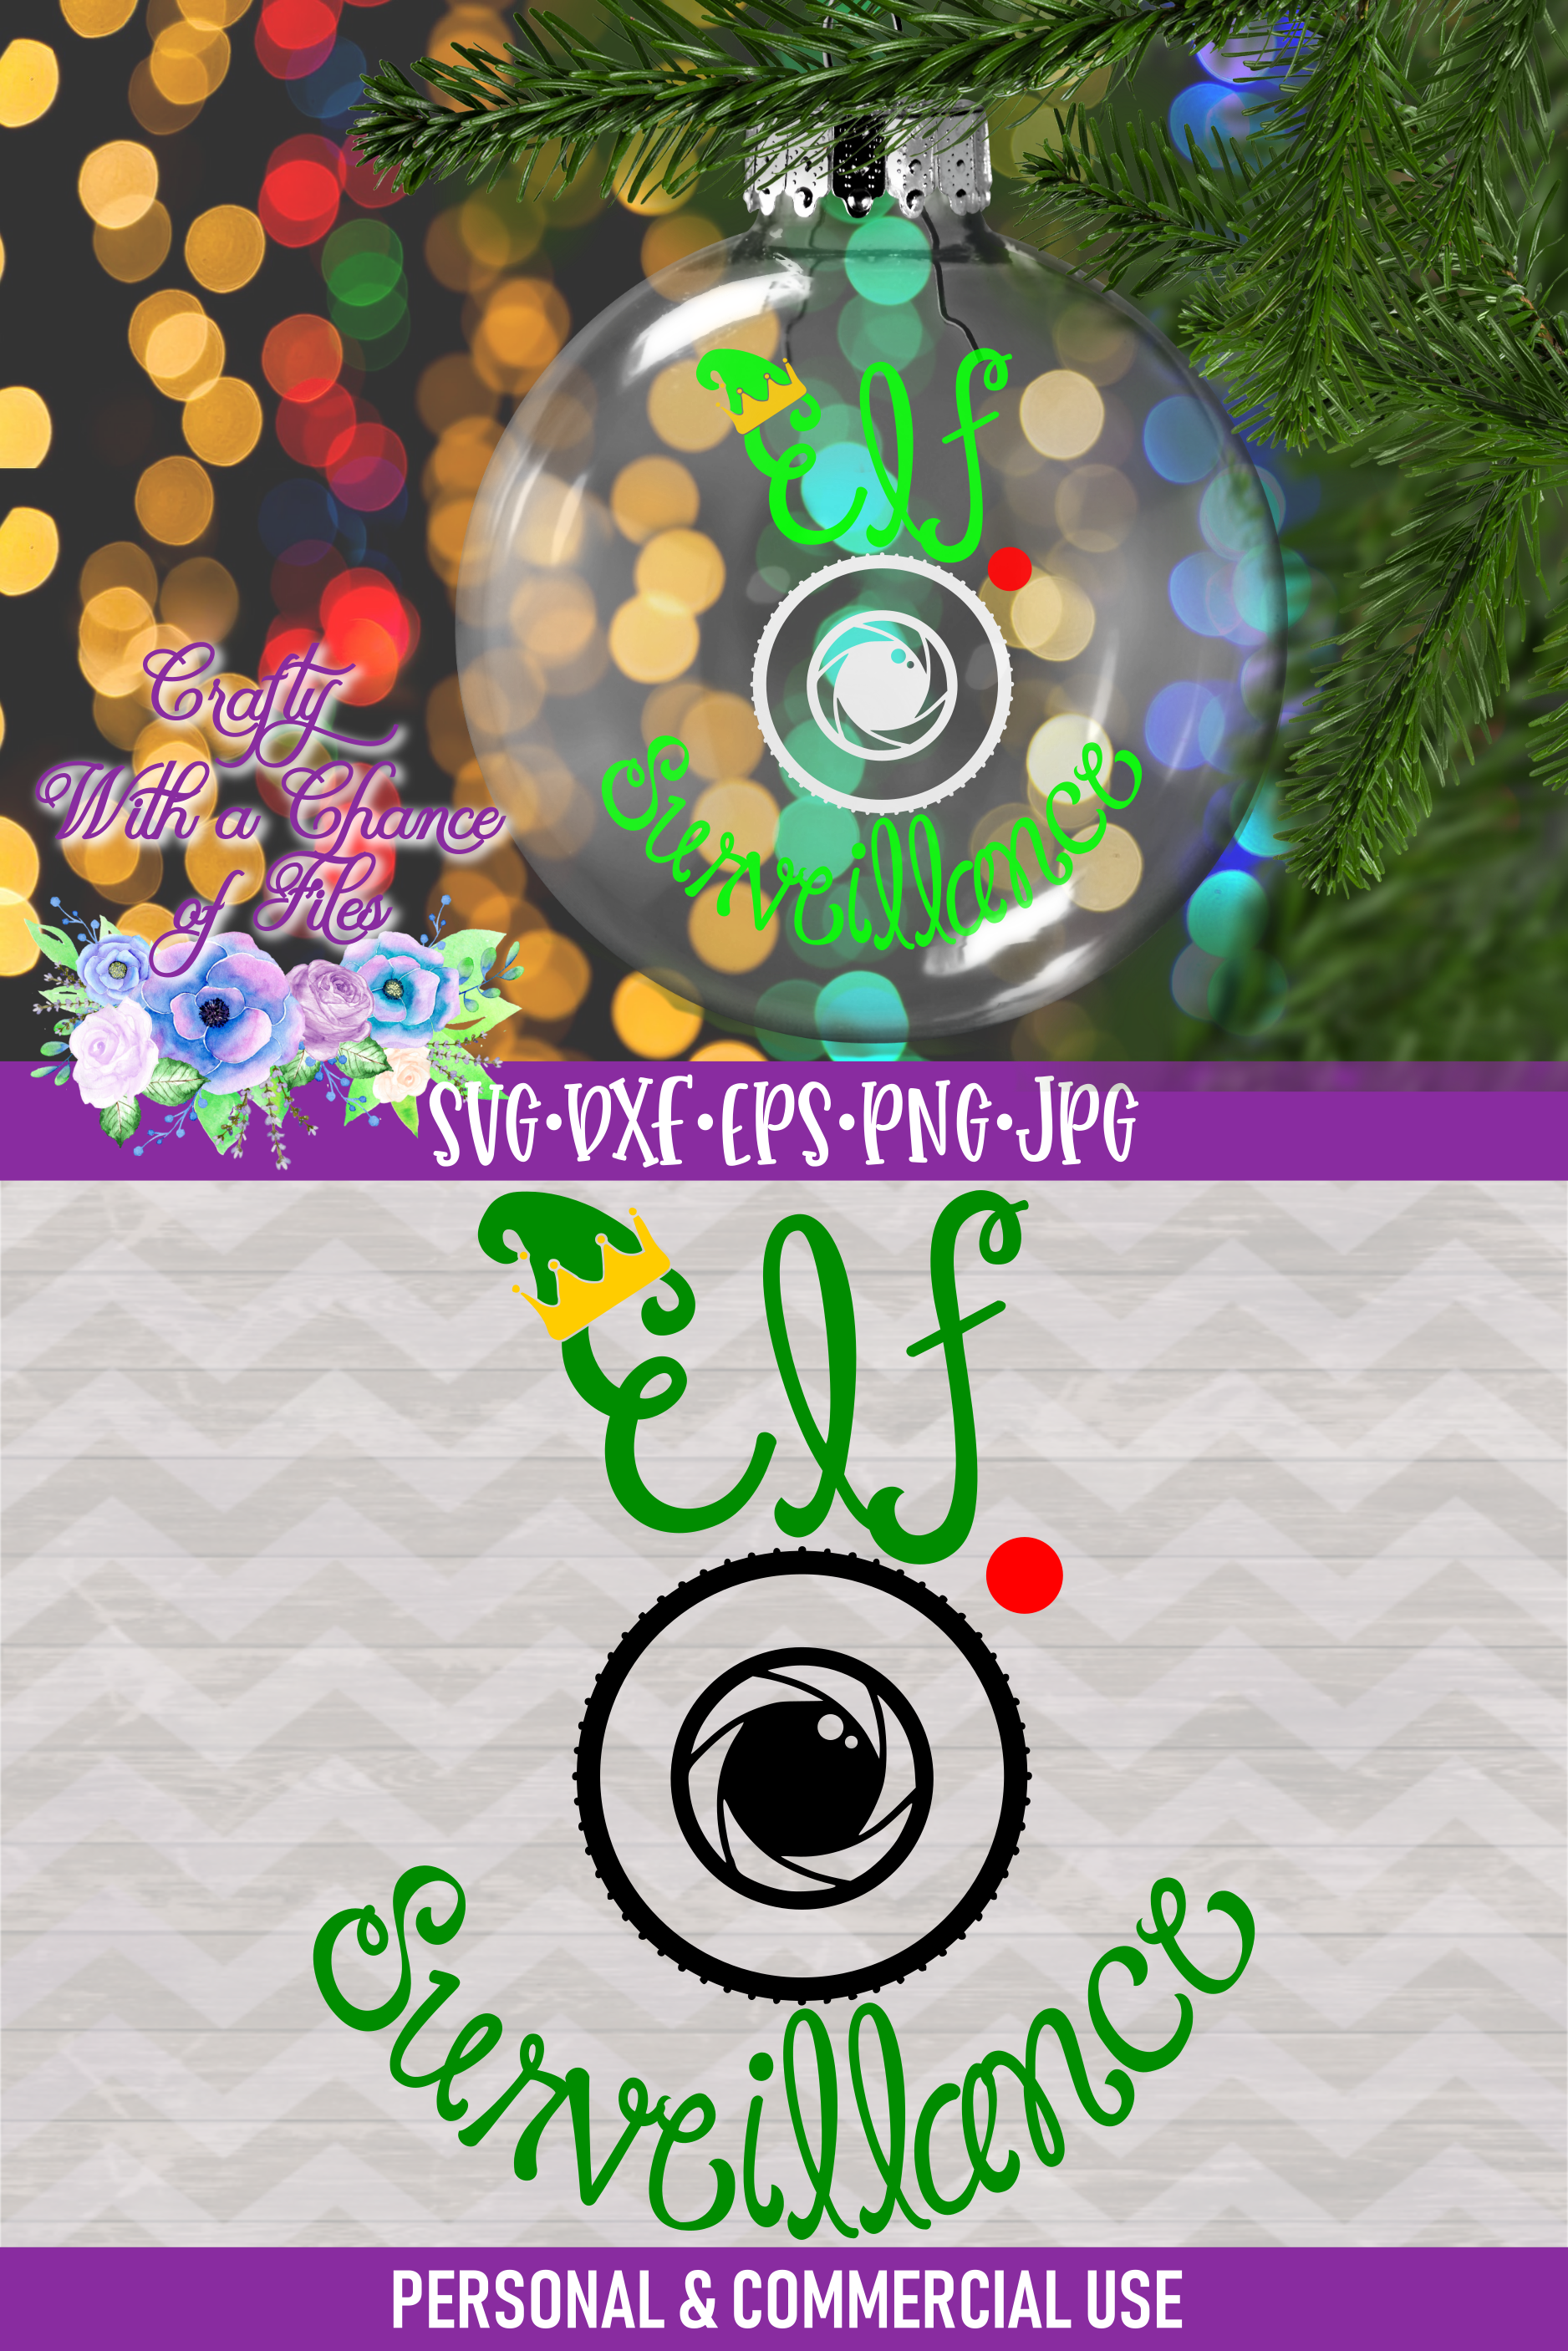 Christmas Ornament Svg Elf Surveillance Svg Bauble Svg By Crafty With A Chance Of Files Thehungryjpeg Com